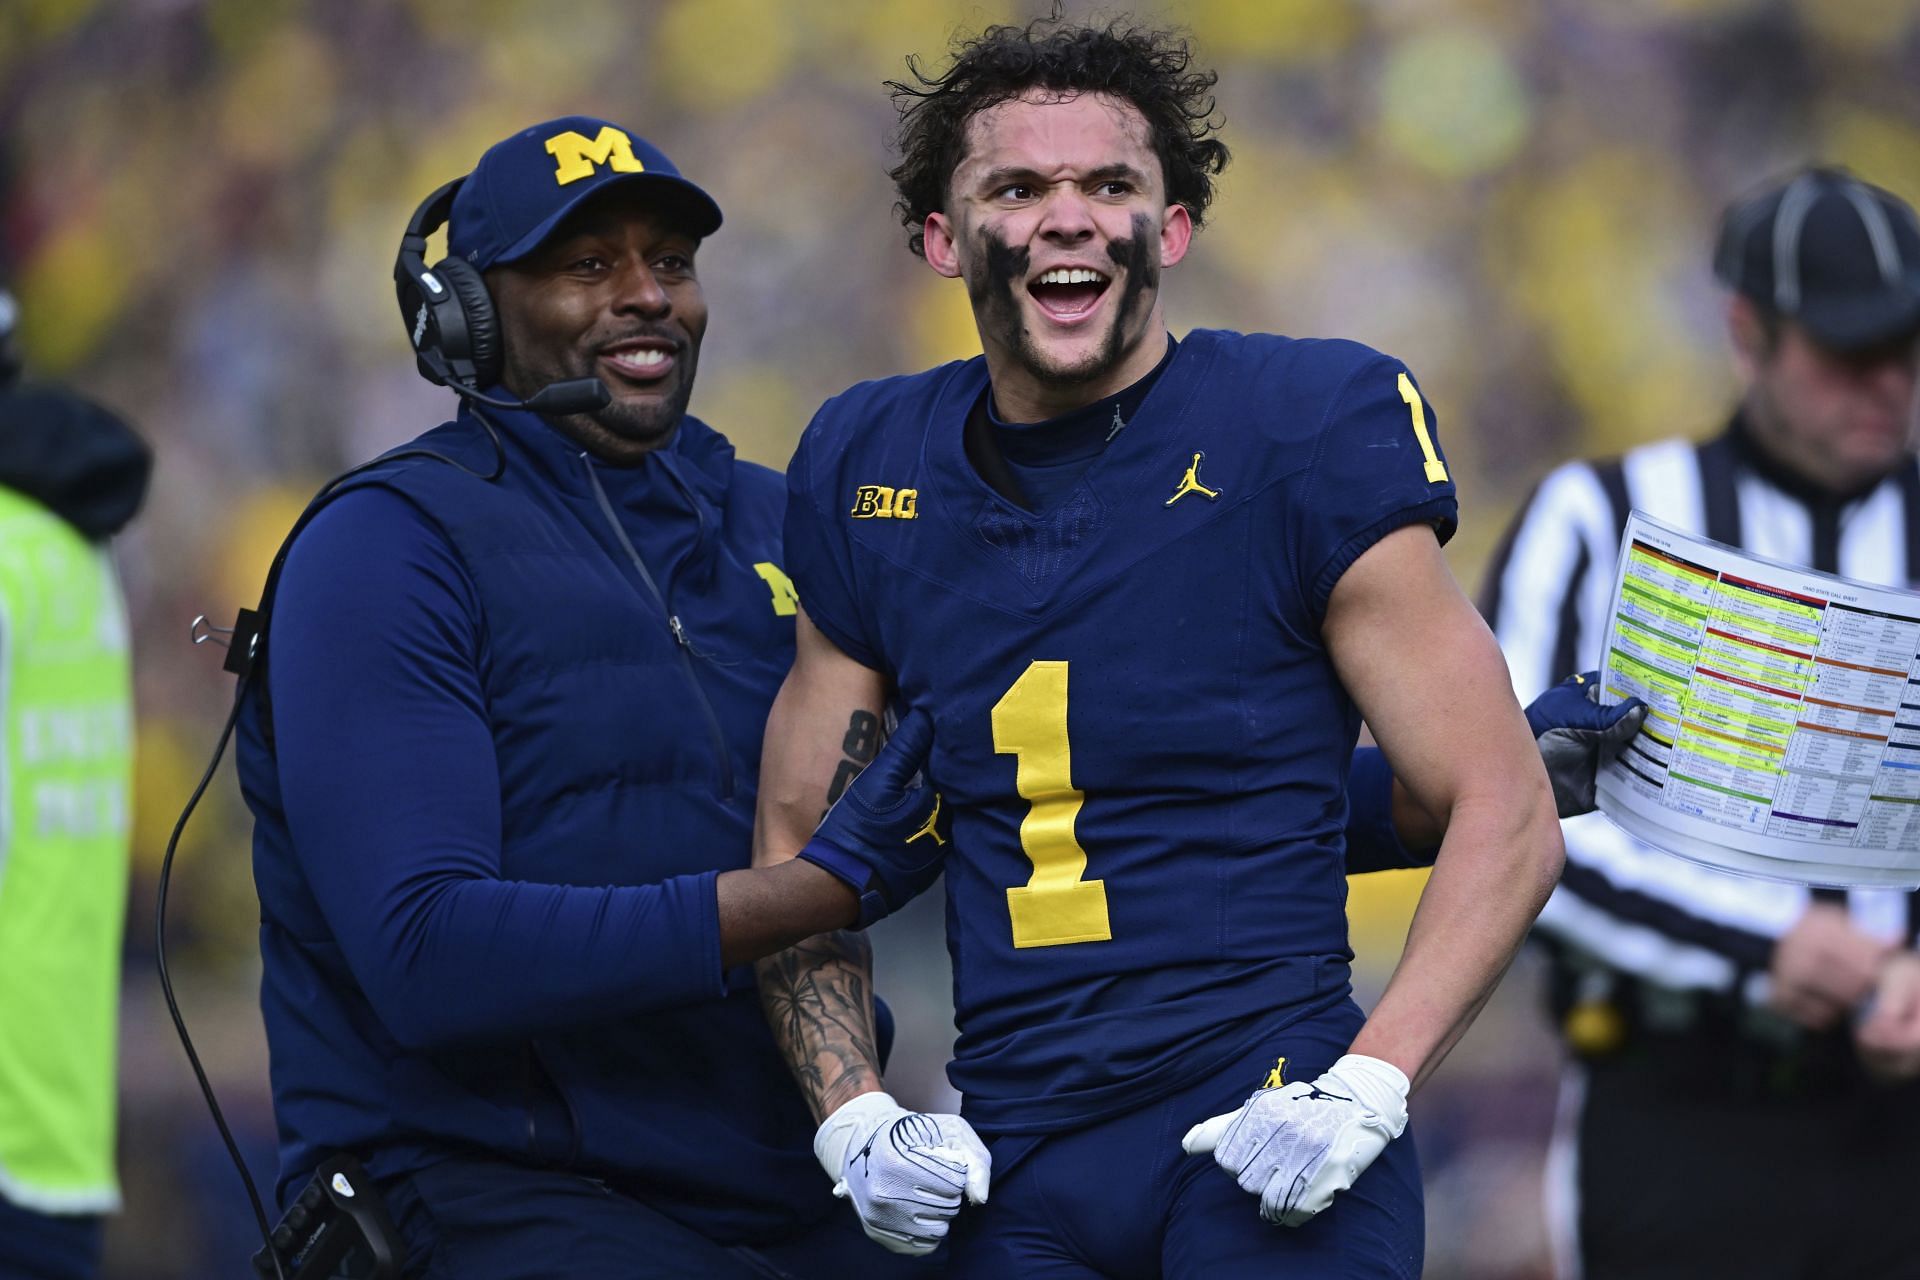 Michigan wide receiver Roman Wilson is grabbed by acting head coach Sherrone Moore after video replay confirmed his touchdown on Nov. 25 in Ann Arbor, Mich. (AP Photo/David Dermer)